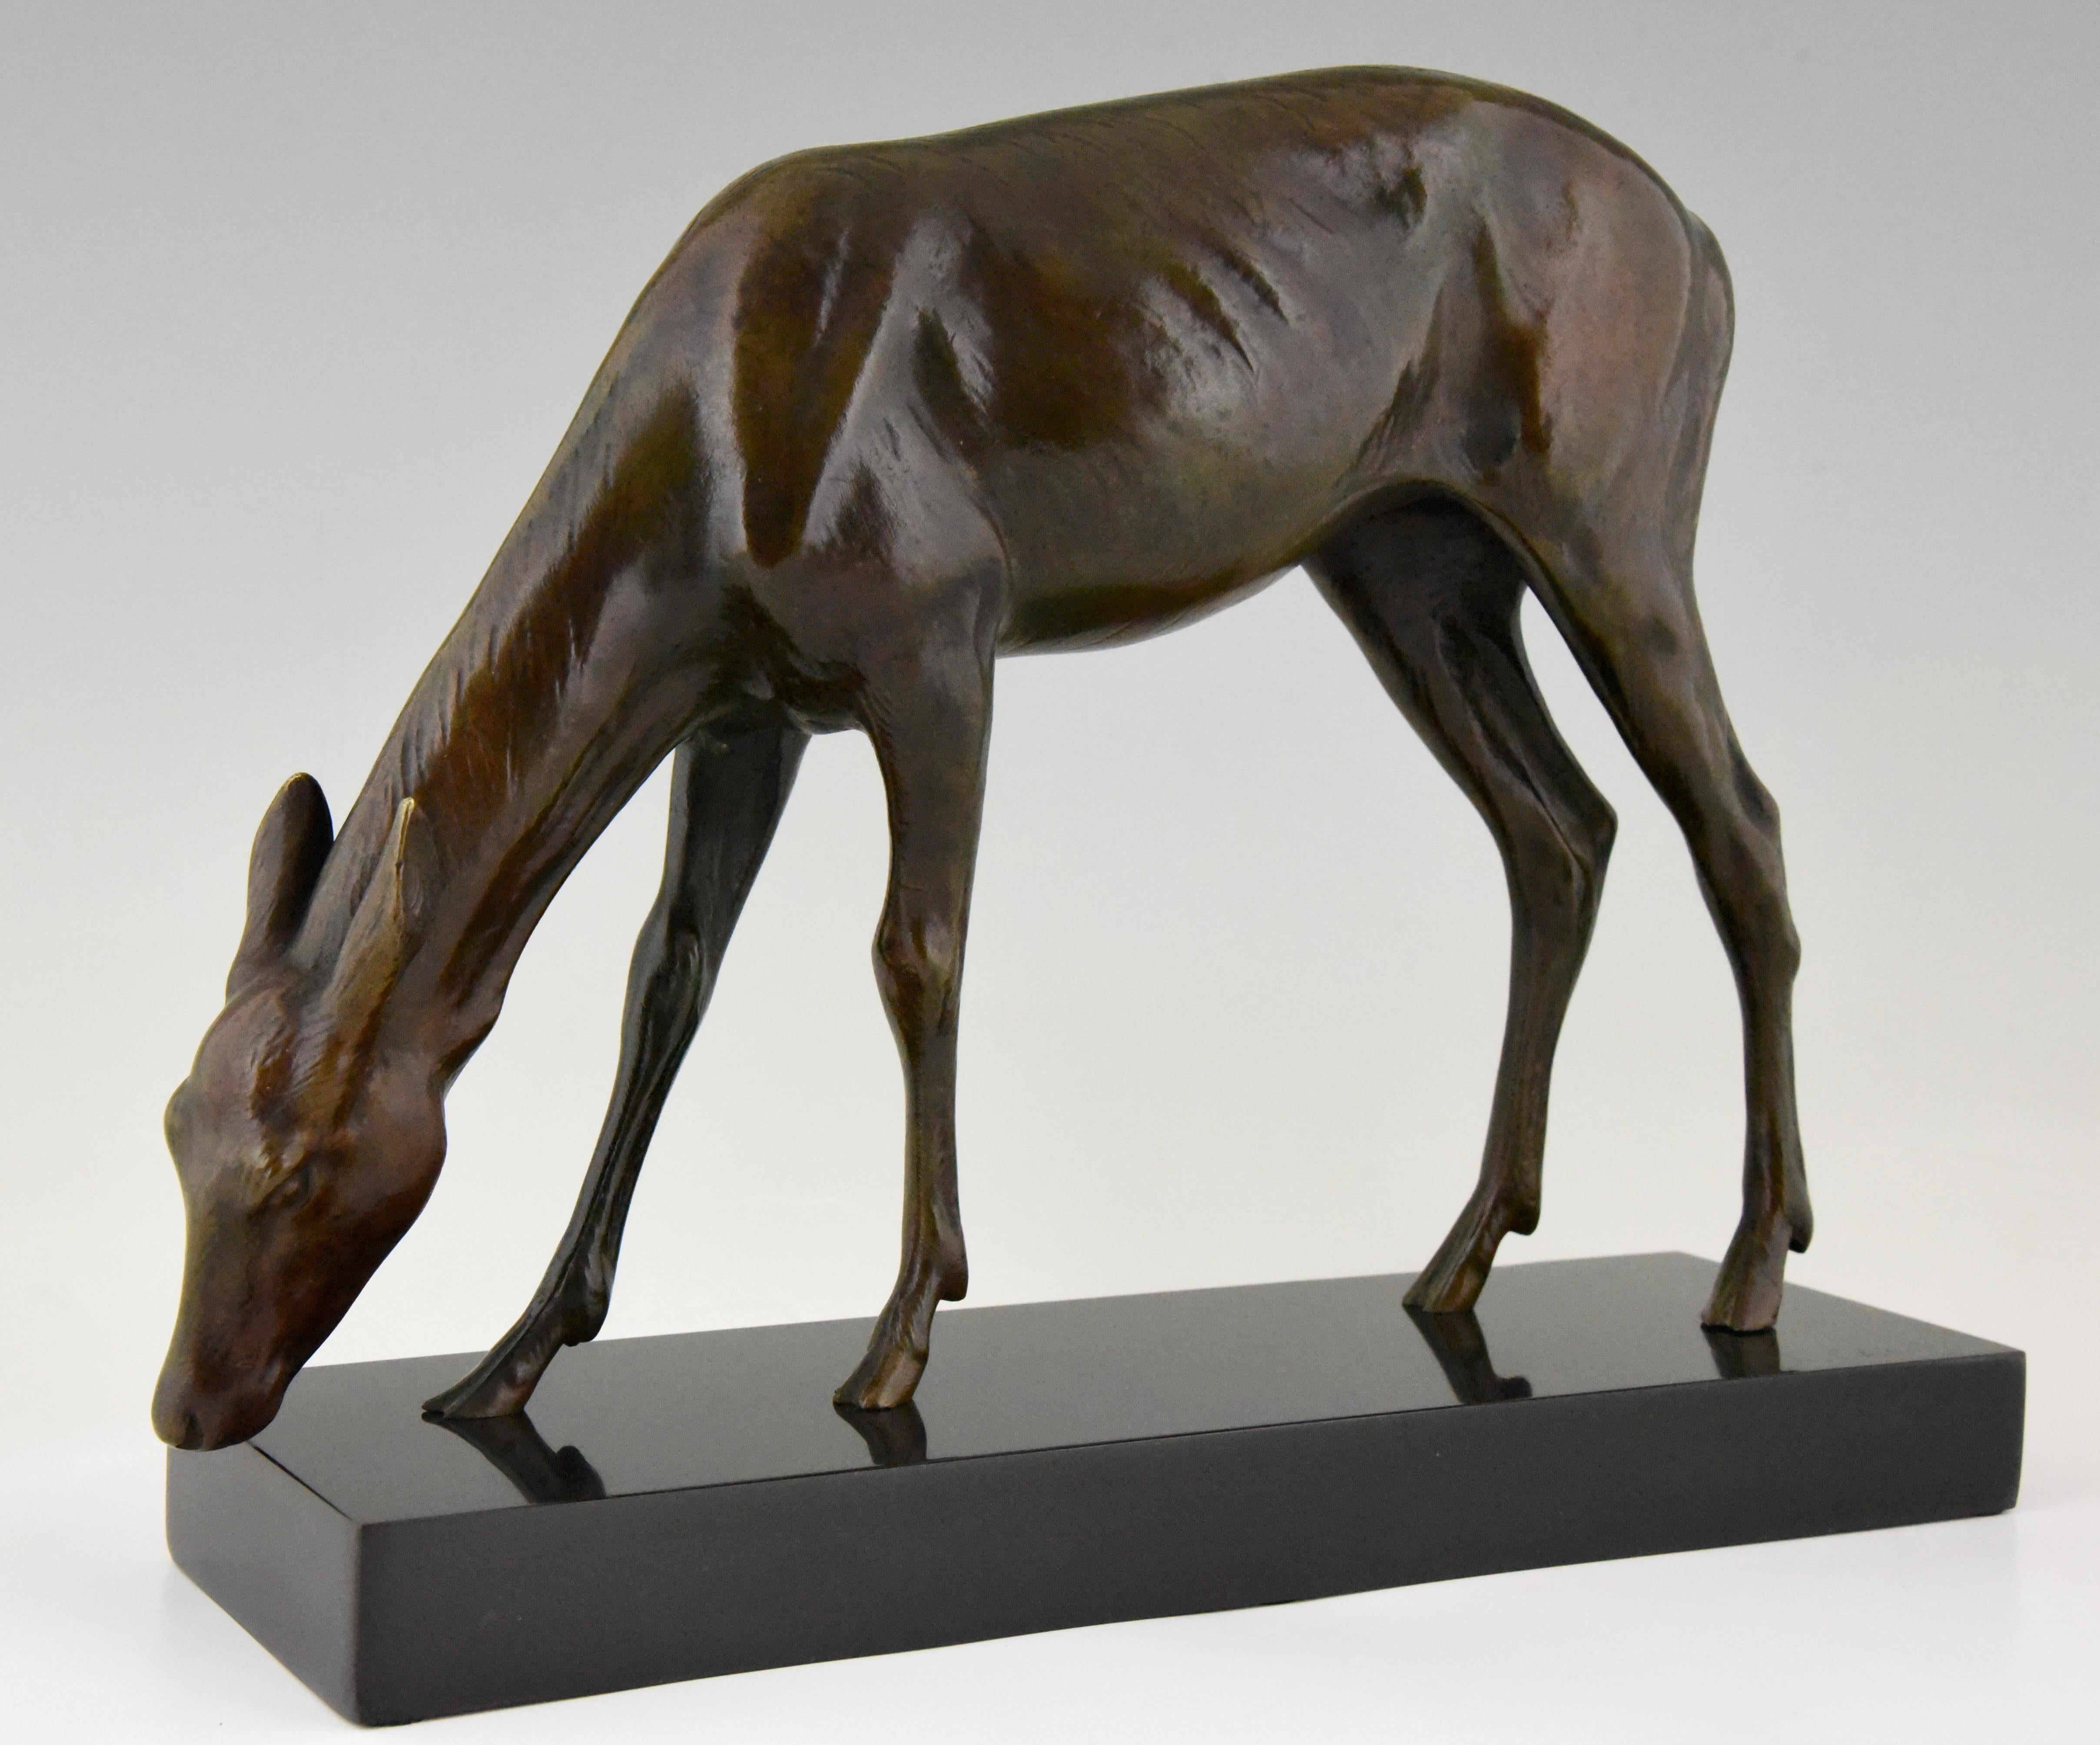 Beautiful Art Deco bronze sculpture of a female deer by the famous French sculptor Louis Riche. The bronze has a lovely dark brown patina and stands on a Belgian Black marble base, circa 1920.

      